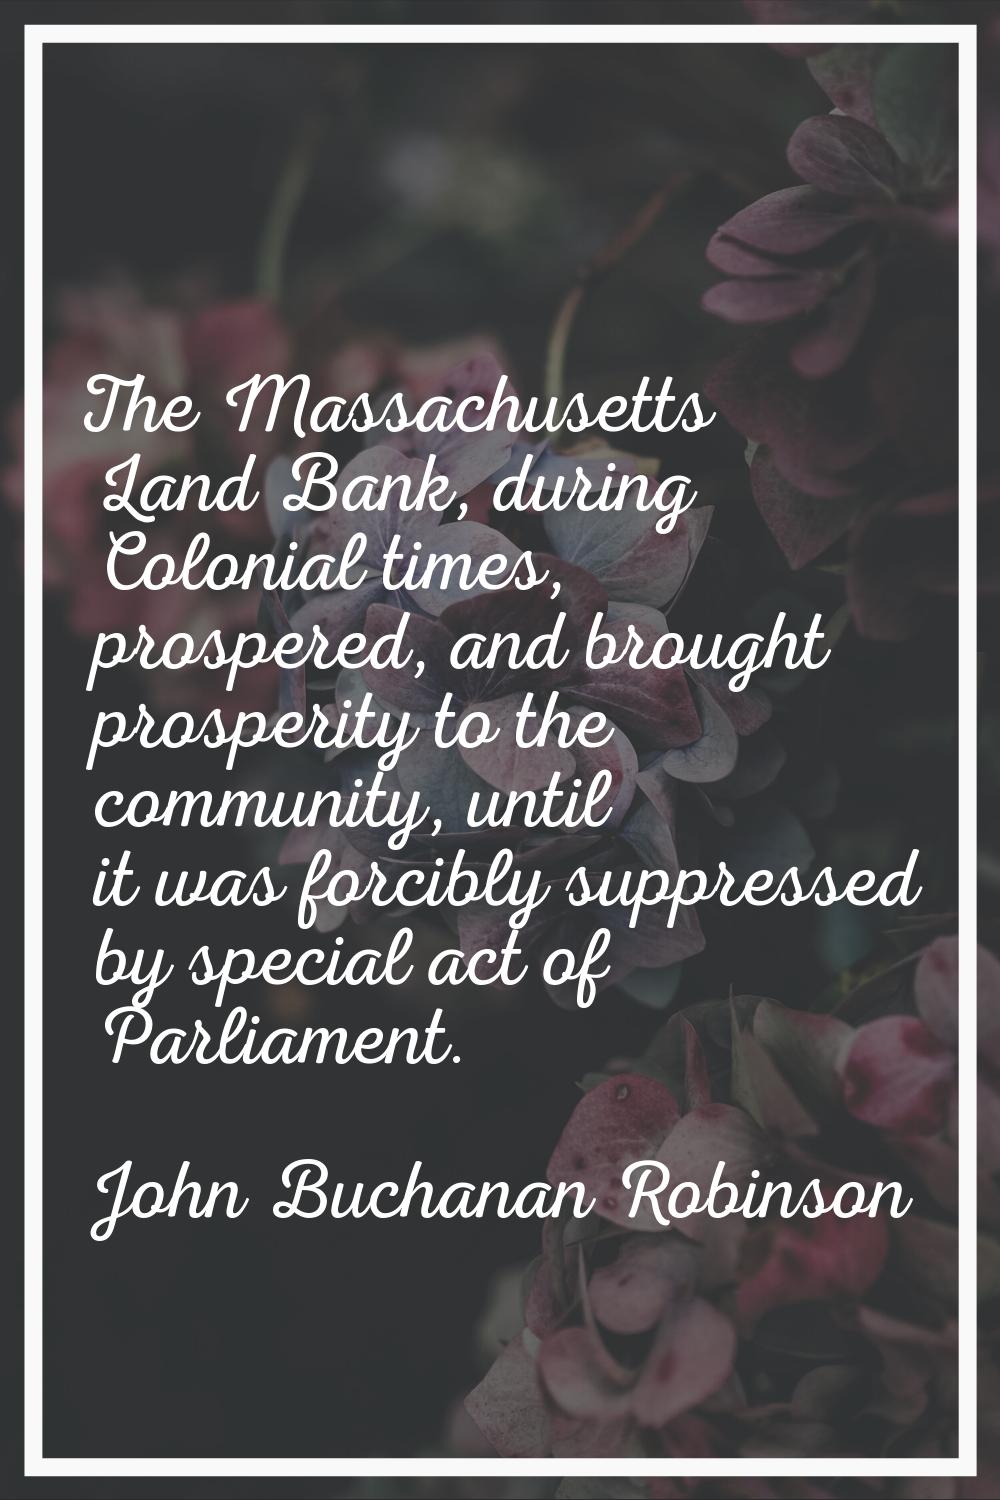 The Massachusetts Land Bank, during Colonial times, prospered, and brought prosperity to the commun